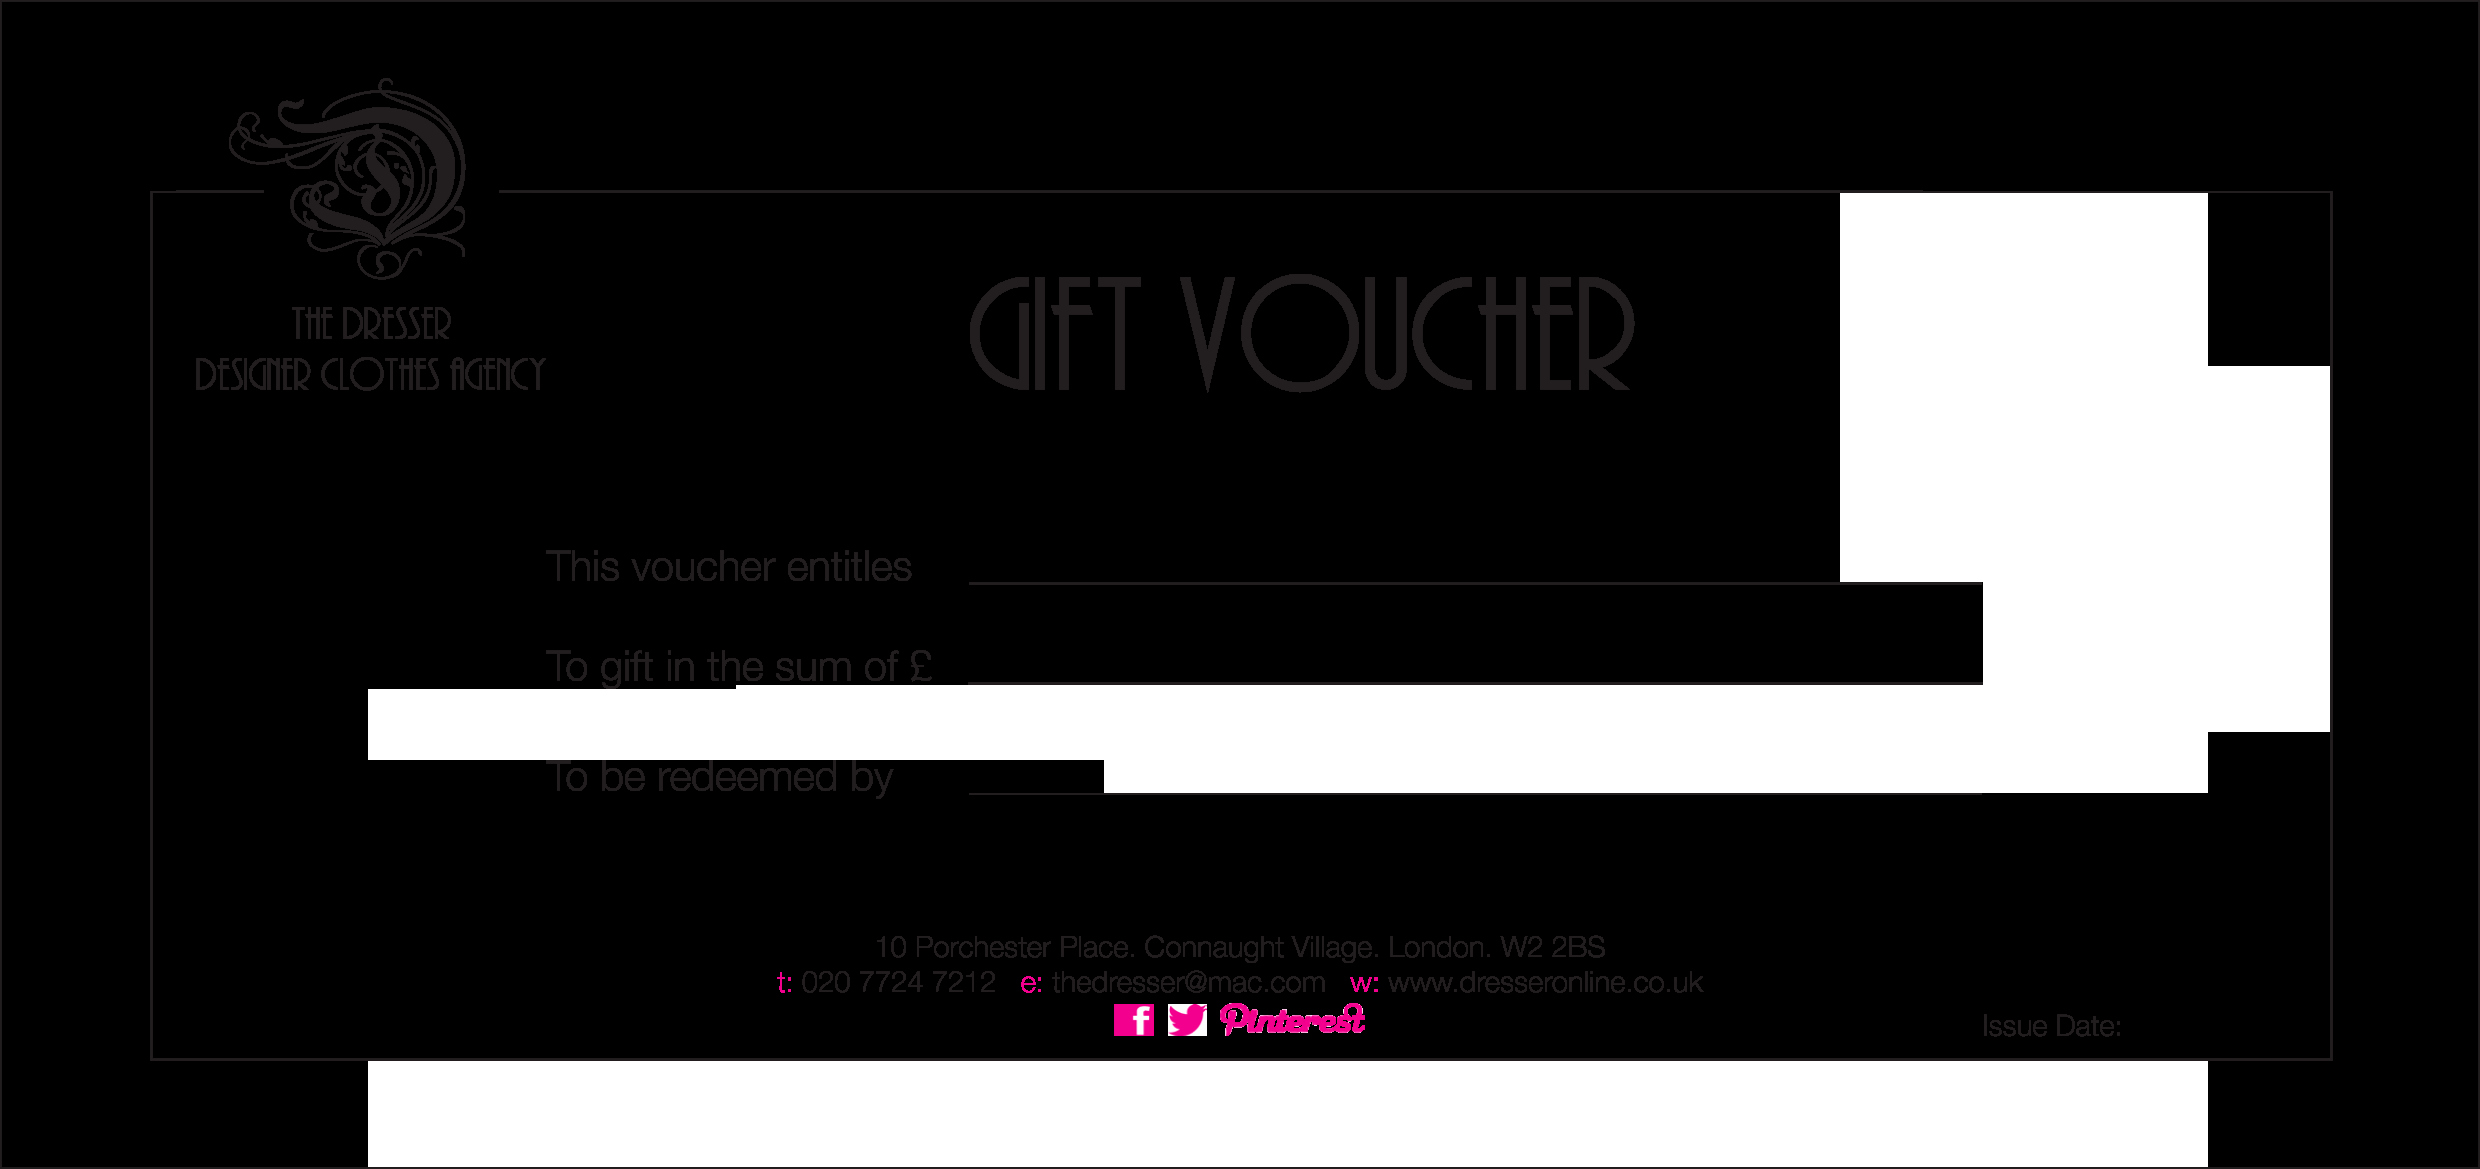 Free Gift Certificate Template Pdf Lovely Gift Voucher Template Word Free Download